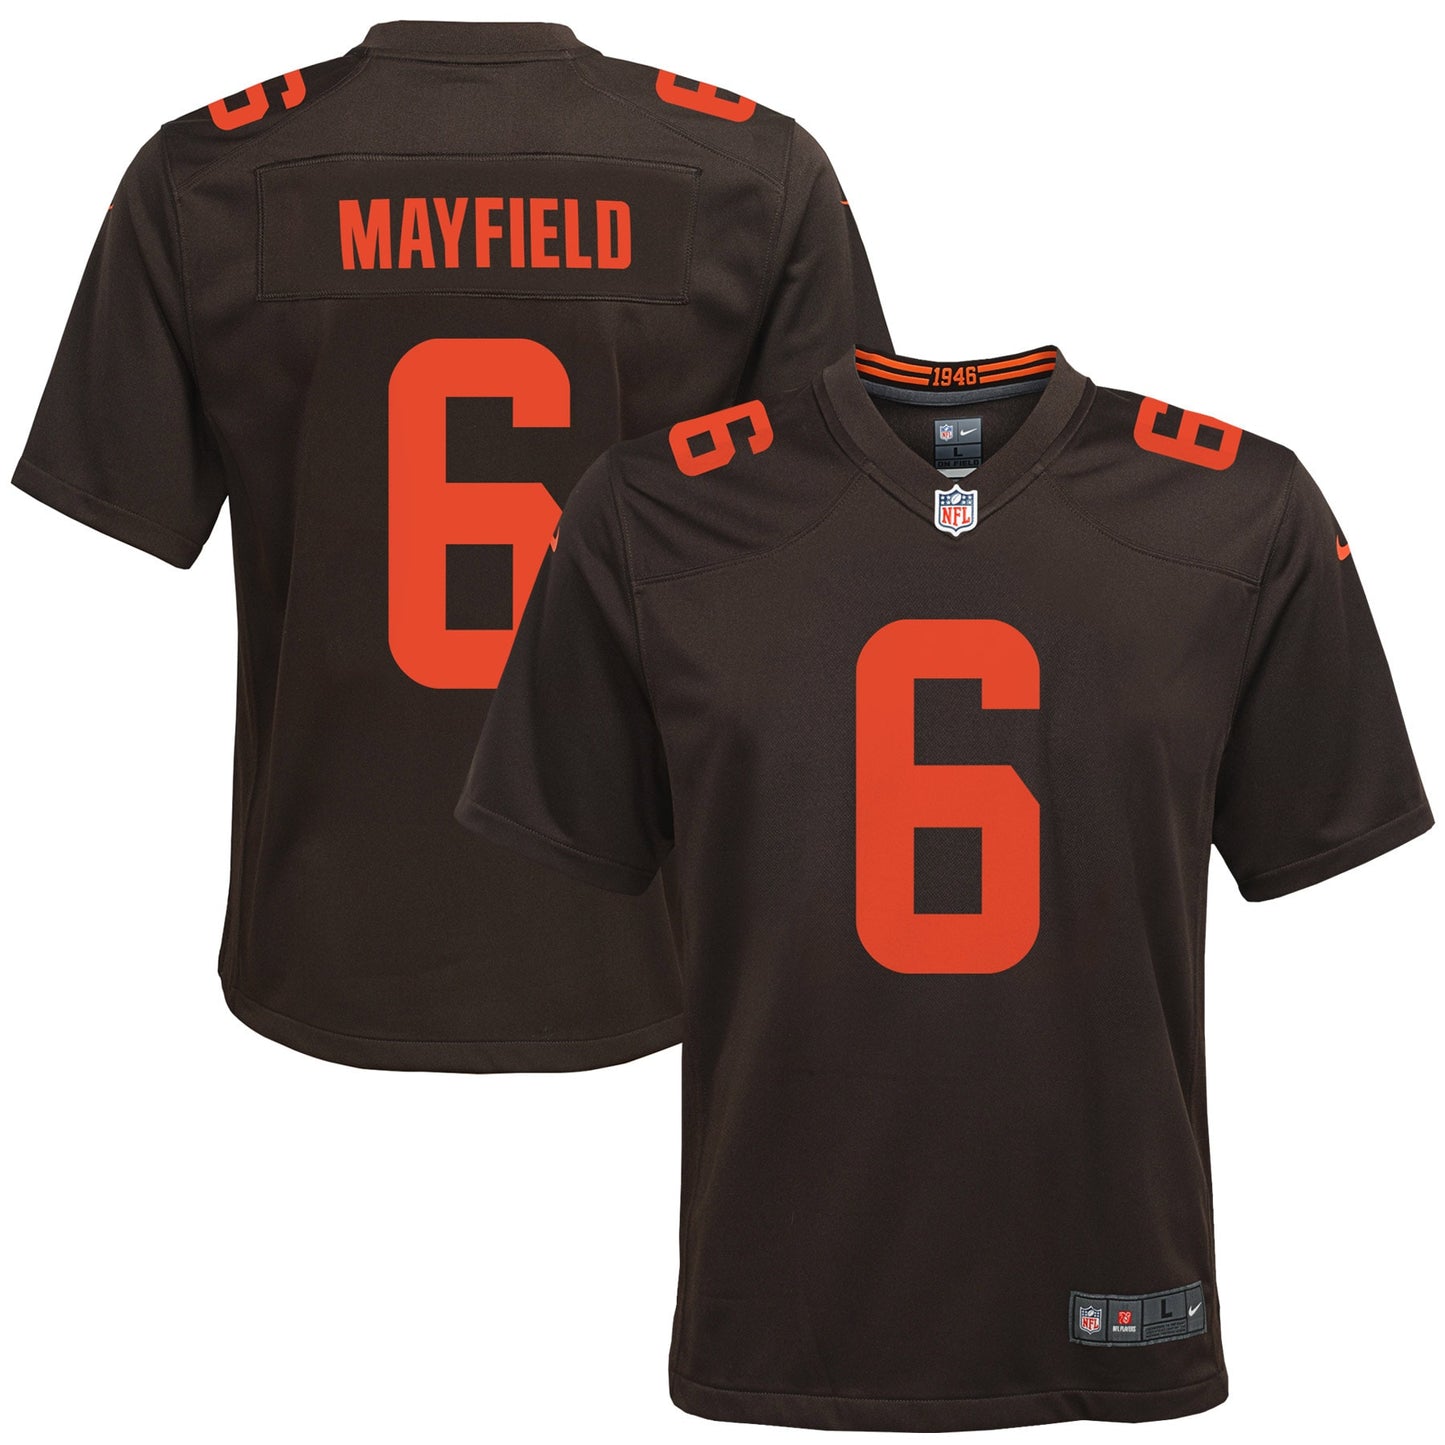 Baker Mayfield Cleveland Browns Nike Youth Alternate Game Jersey - Brown